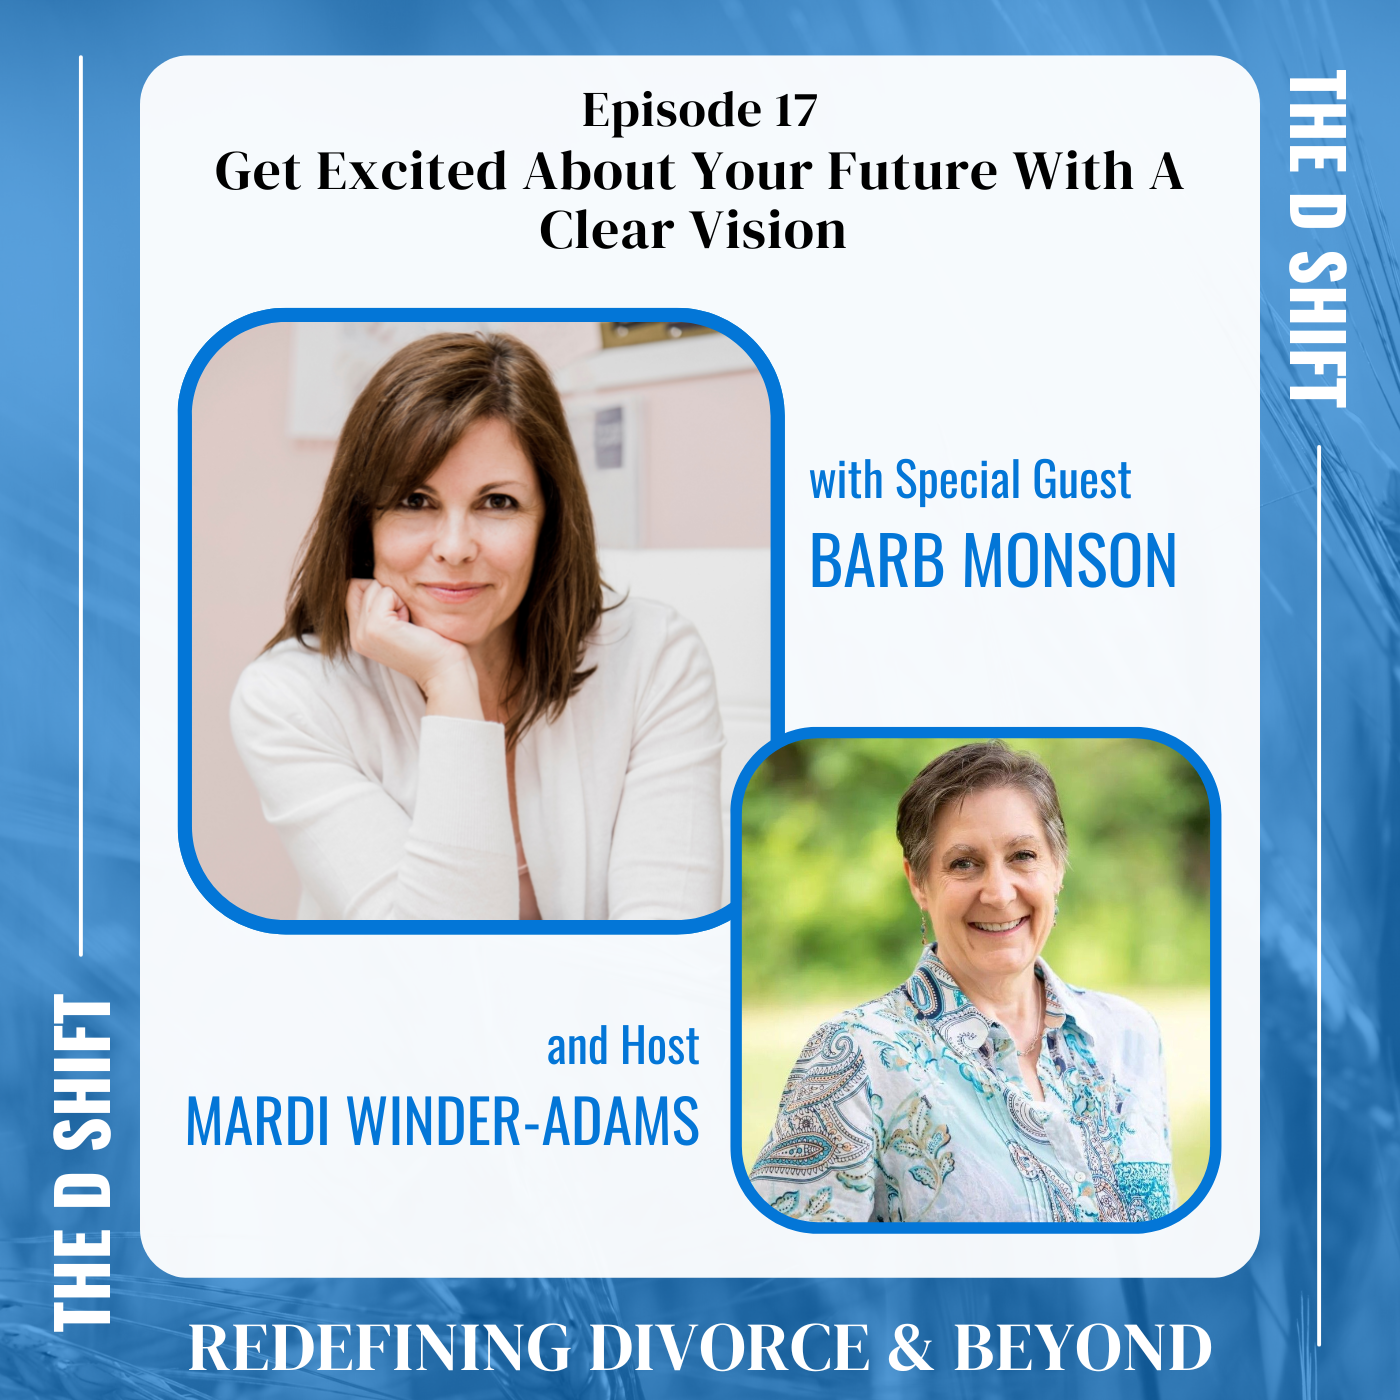 Get Excited About Your Future With A Clear Vision